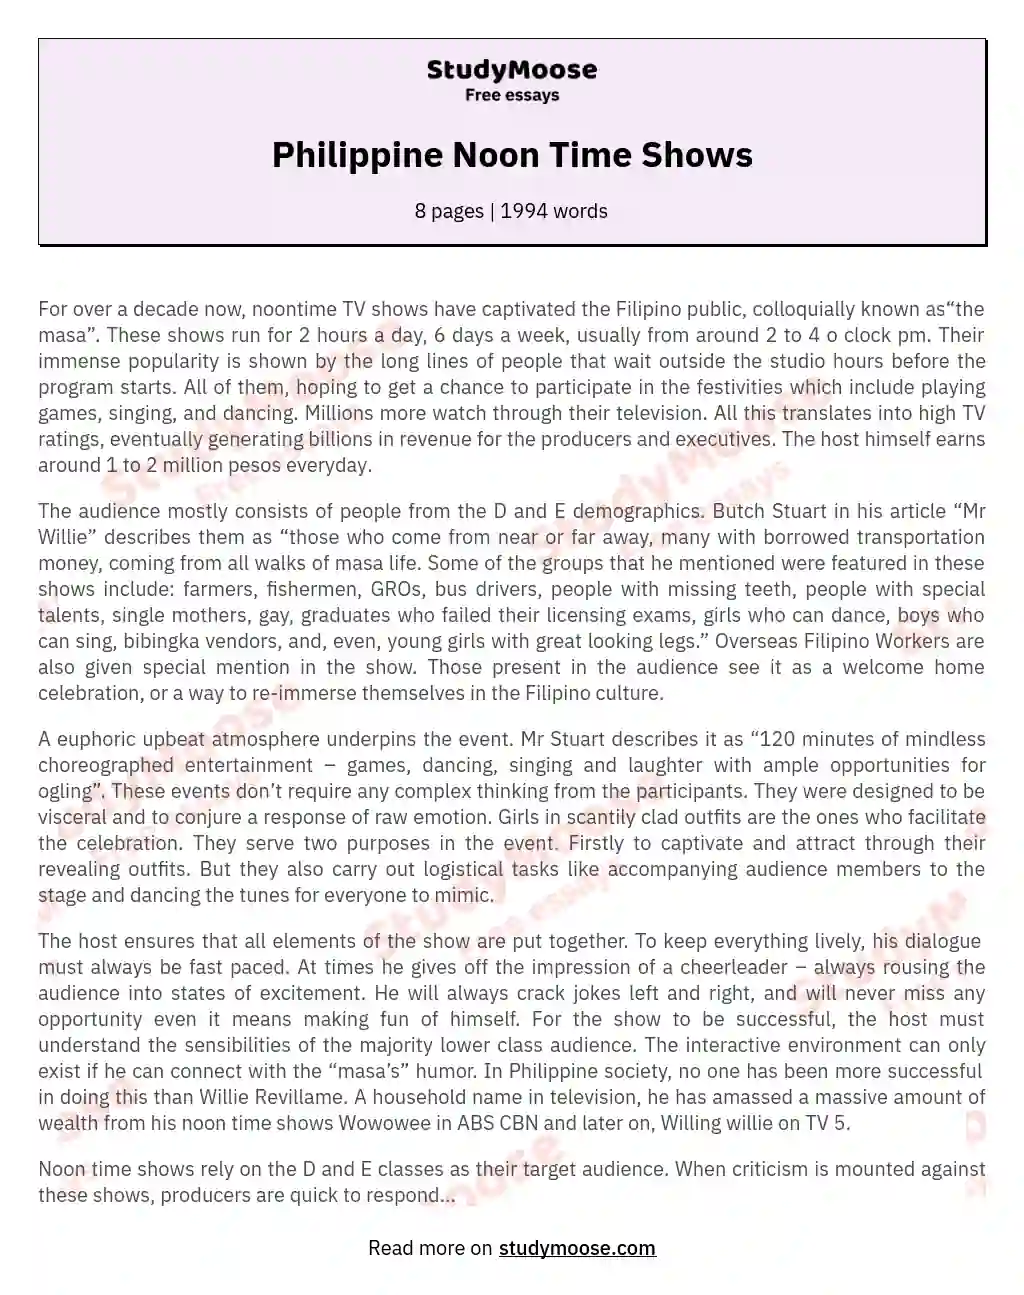 Philippine Noon Time Shows essay